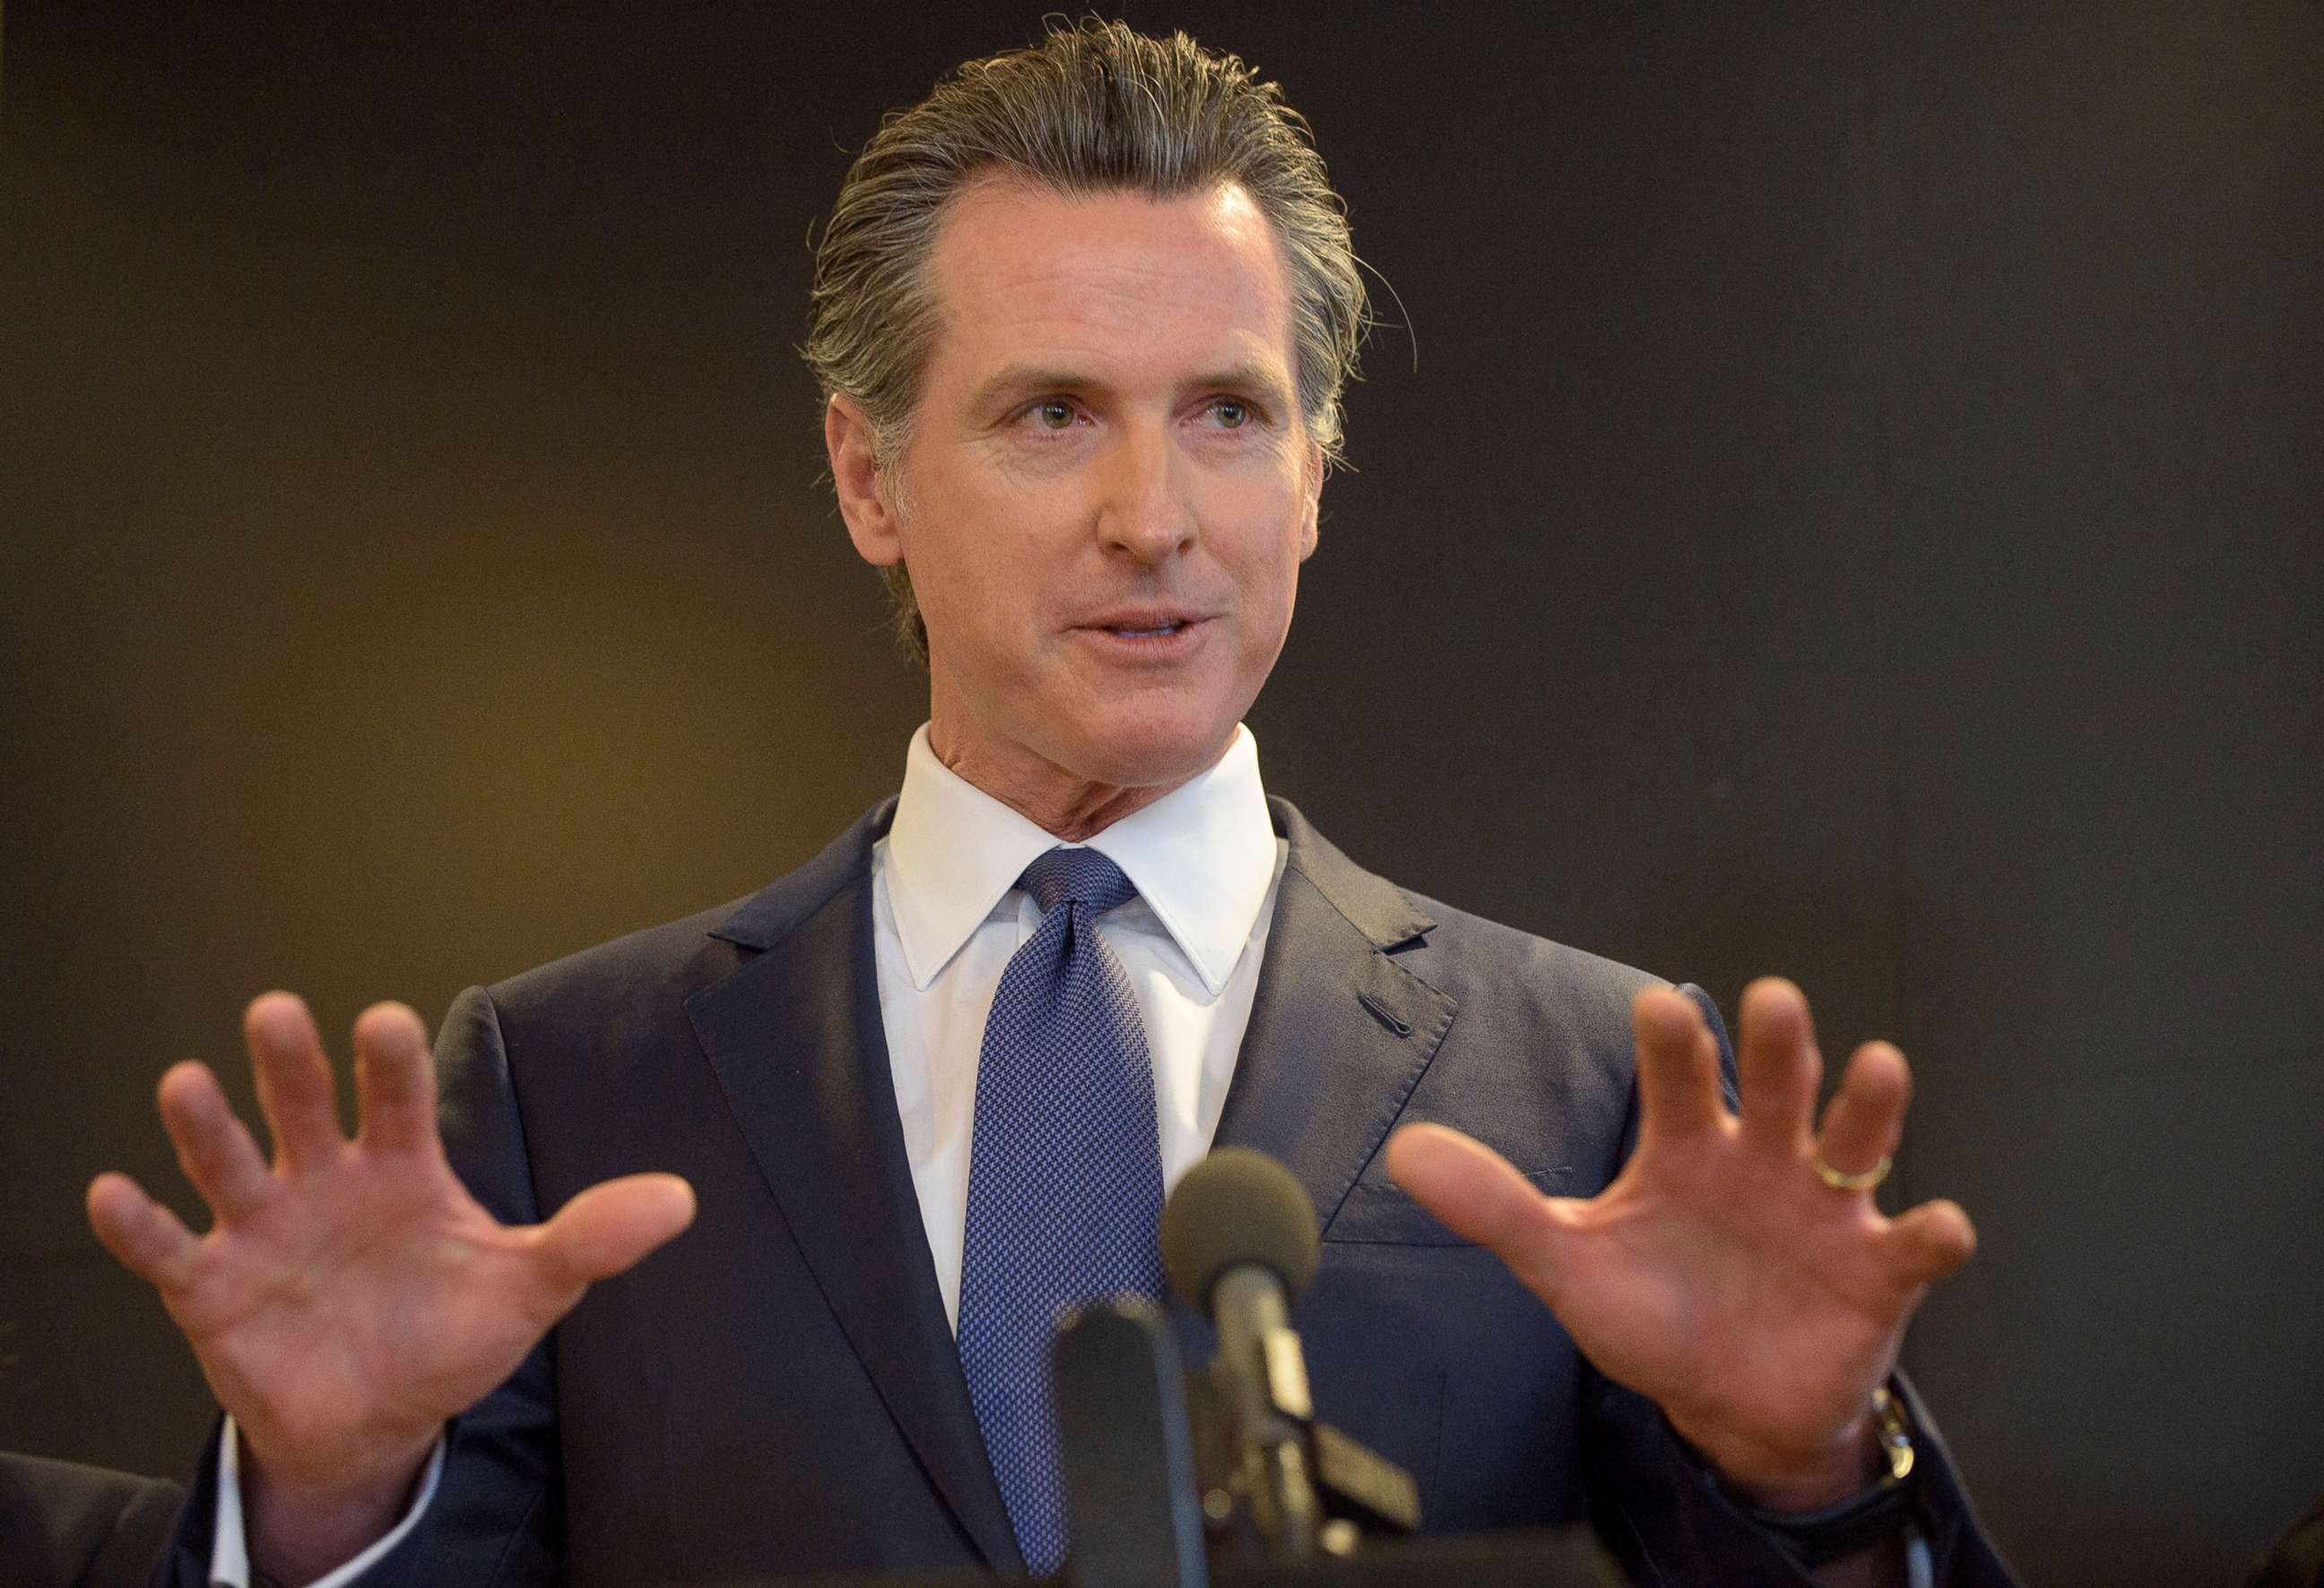 PHOTO: California Governor Gavin Newsom speaks to members of the press at a news conference in Sacramento, Calif., Feb. 27, 2020.